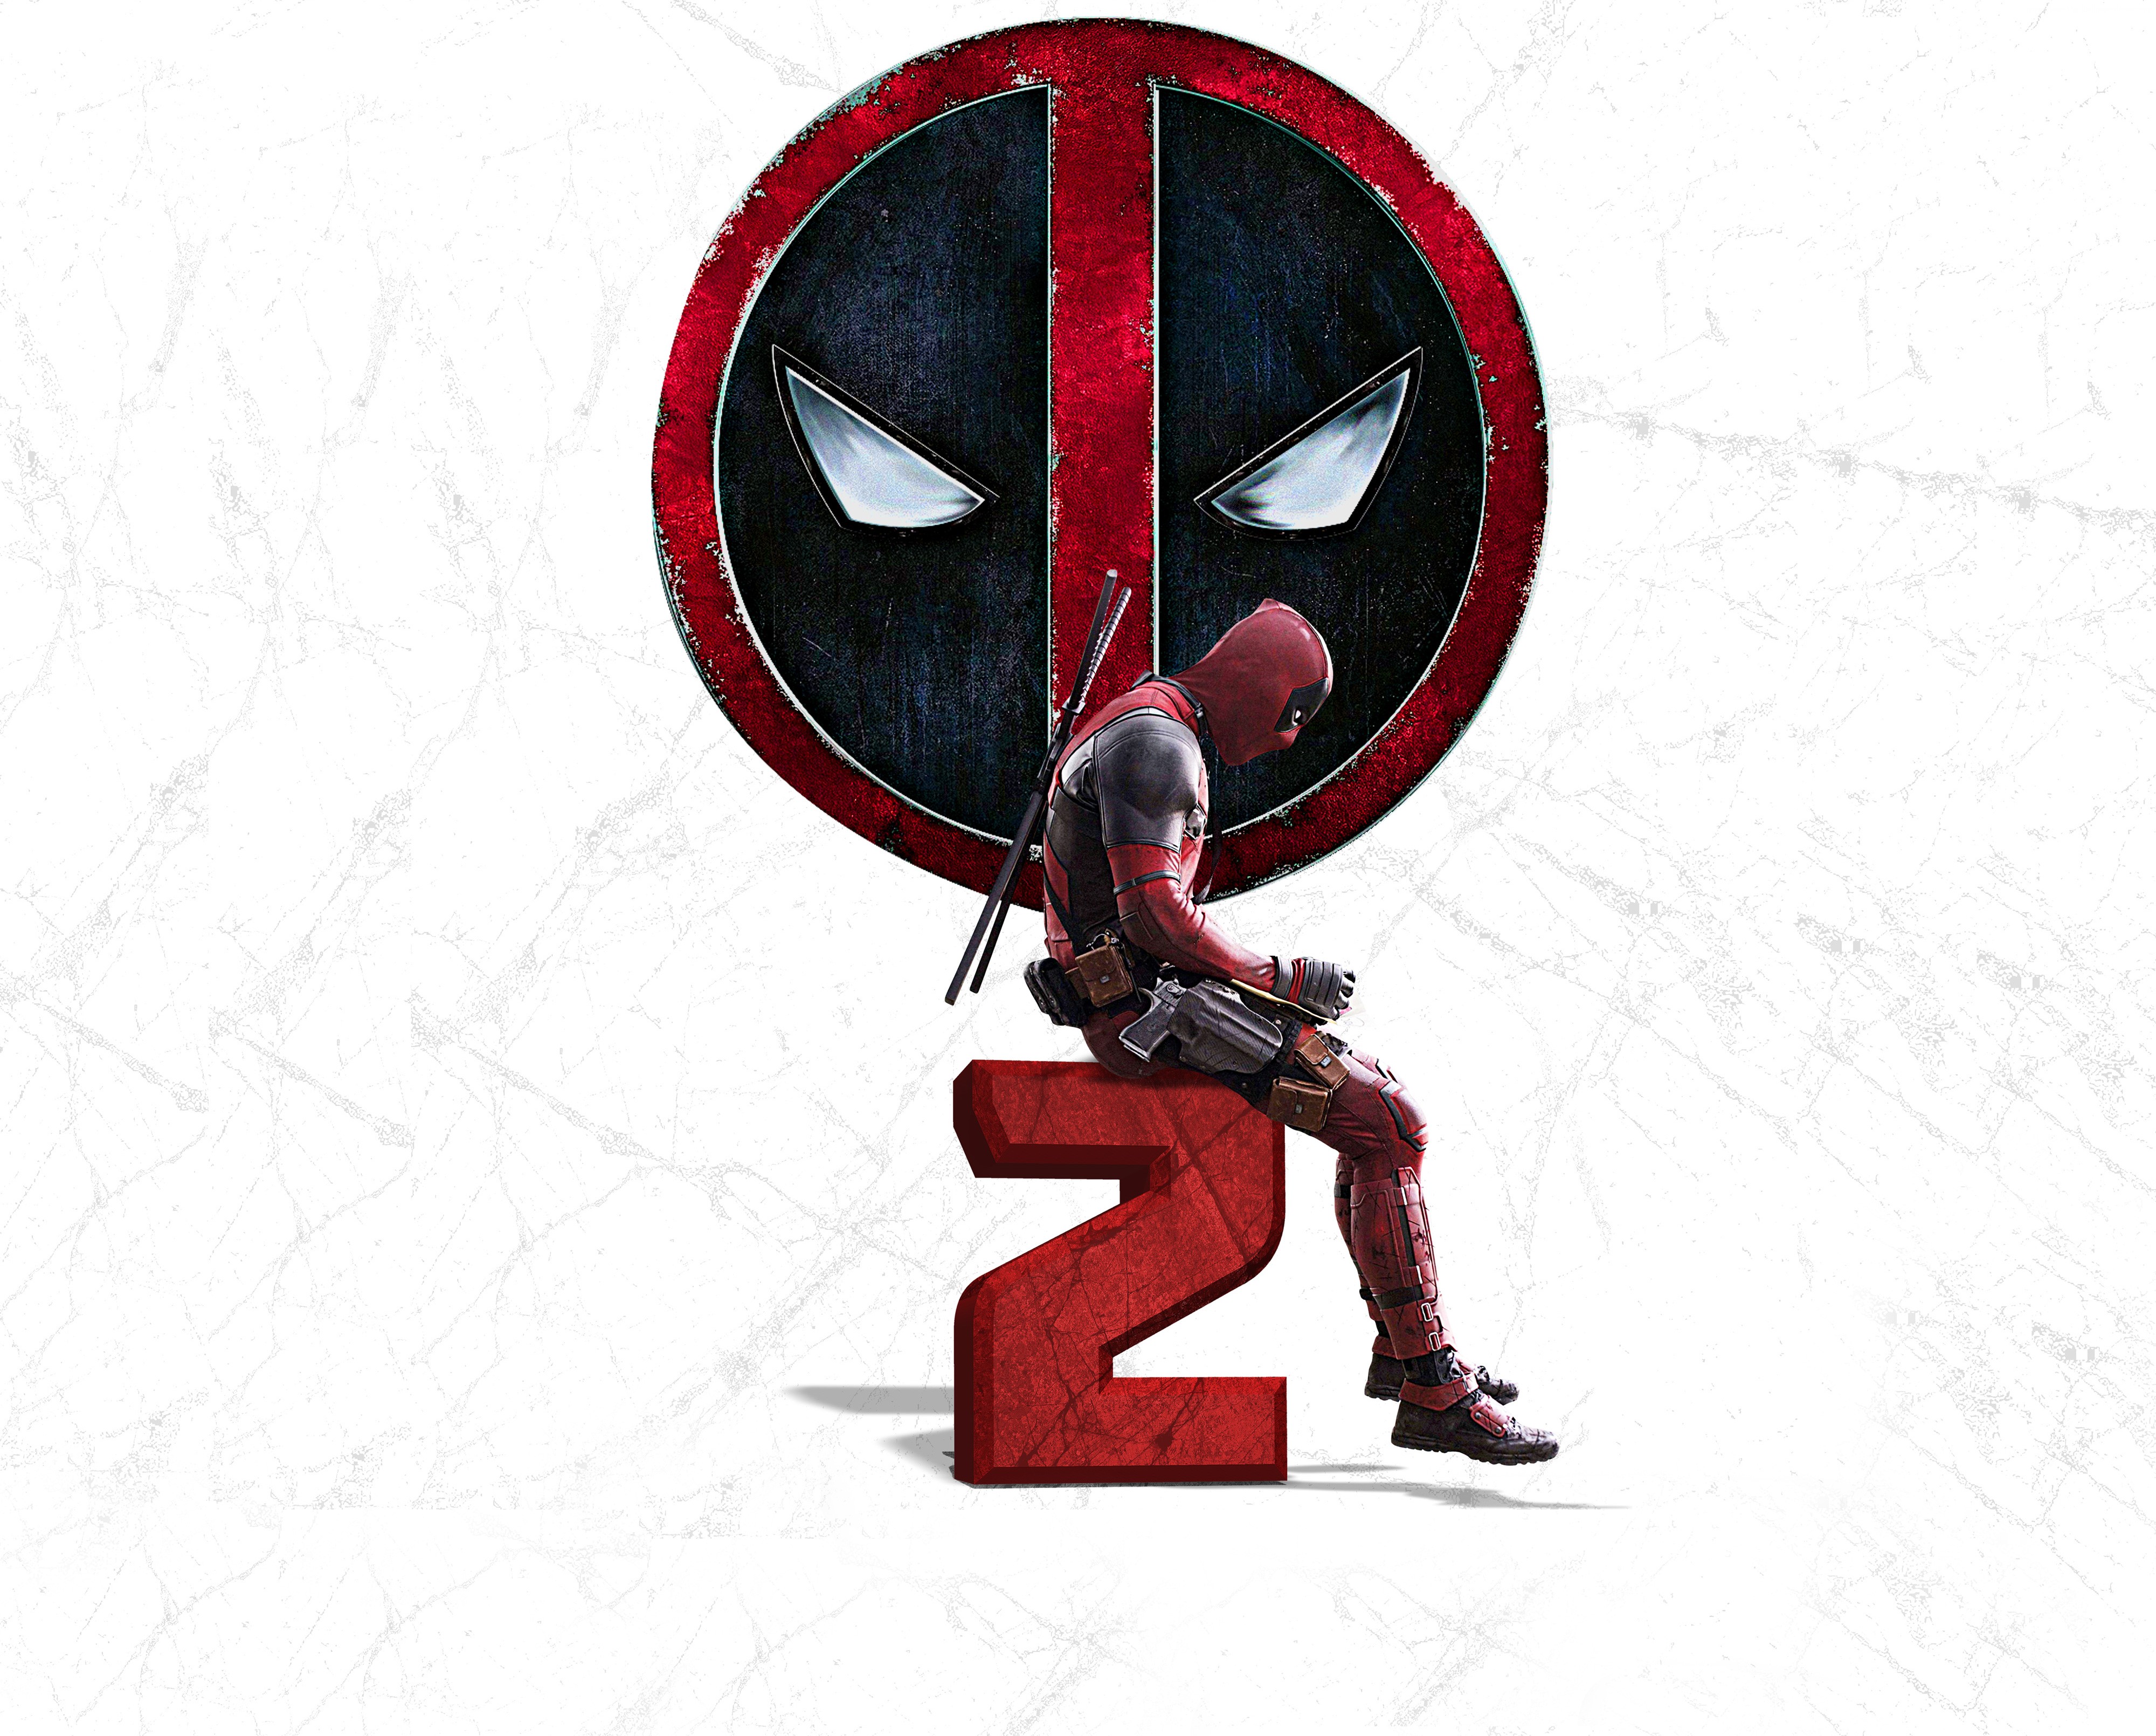 Deadpool 2 Movie Poster Wallpapers